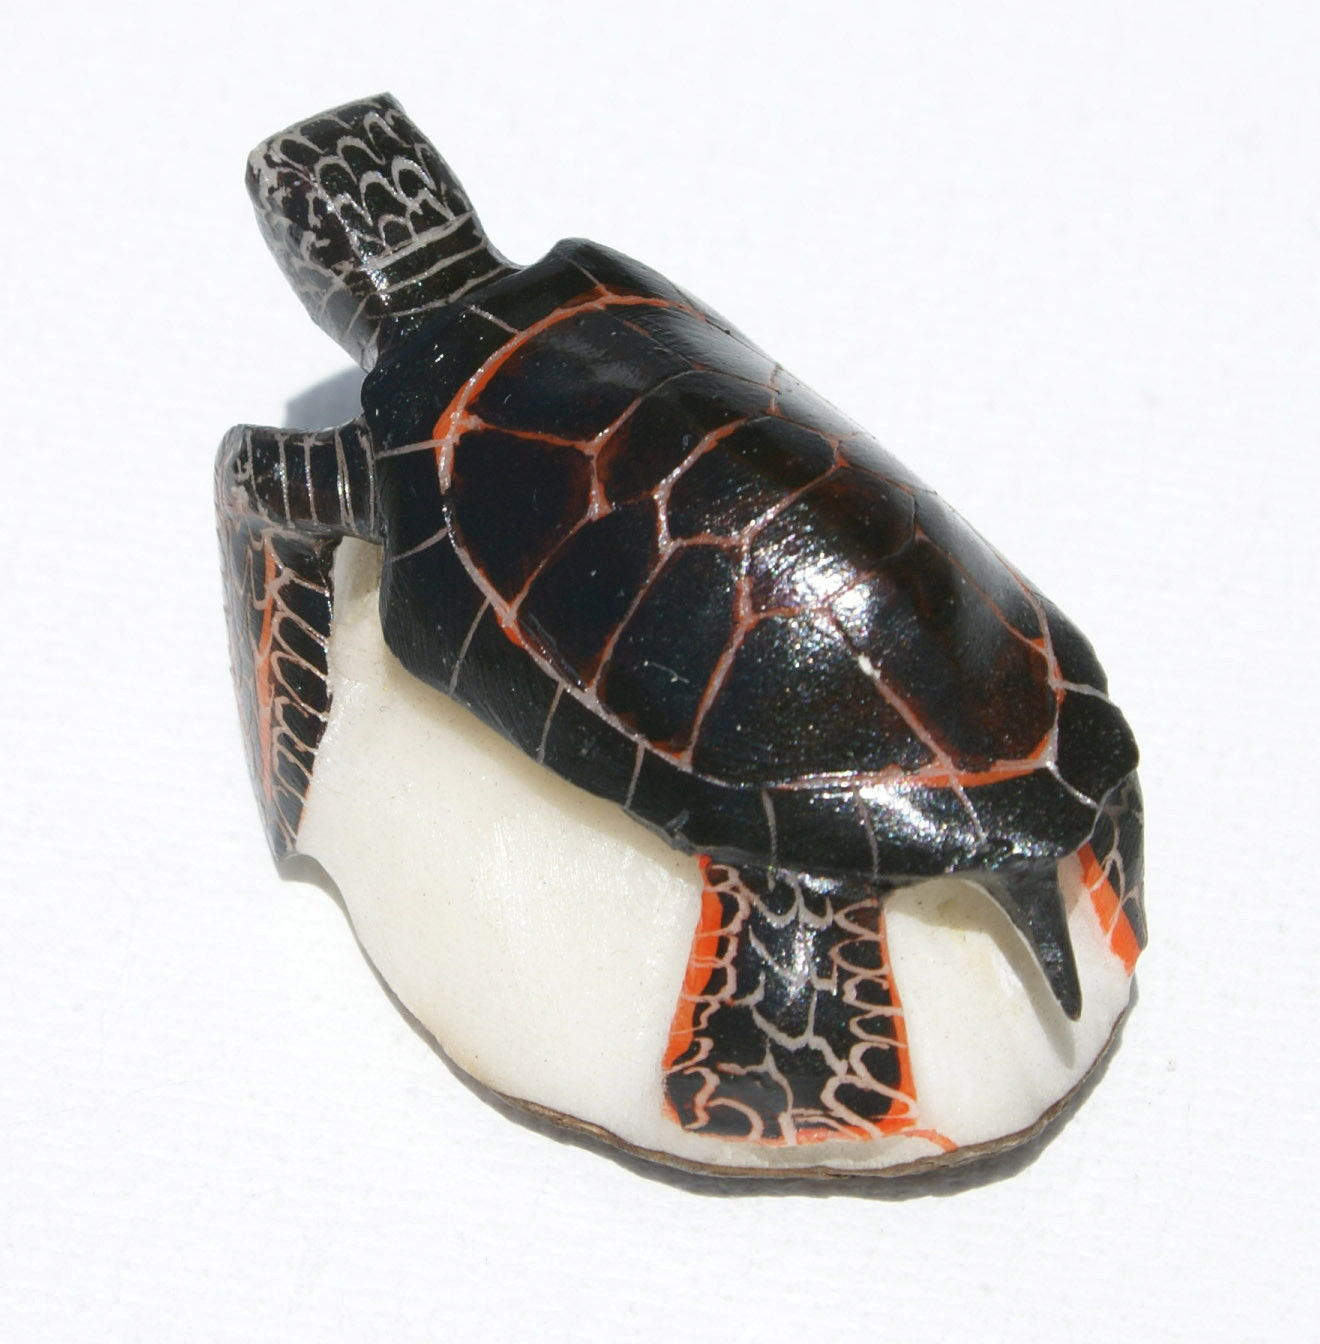 Sea Turtle Collectible Figurine Sculpture Statue Art Hand Carved of ...